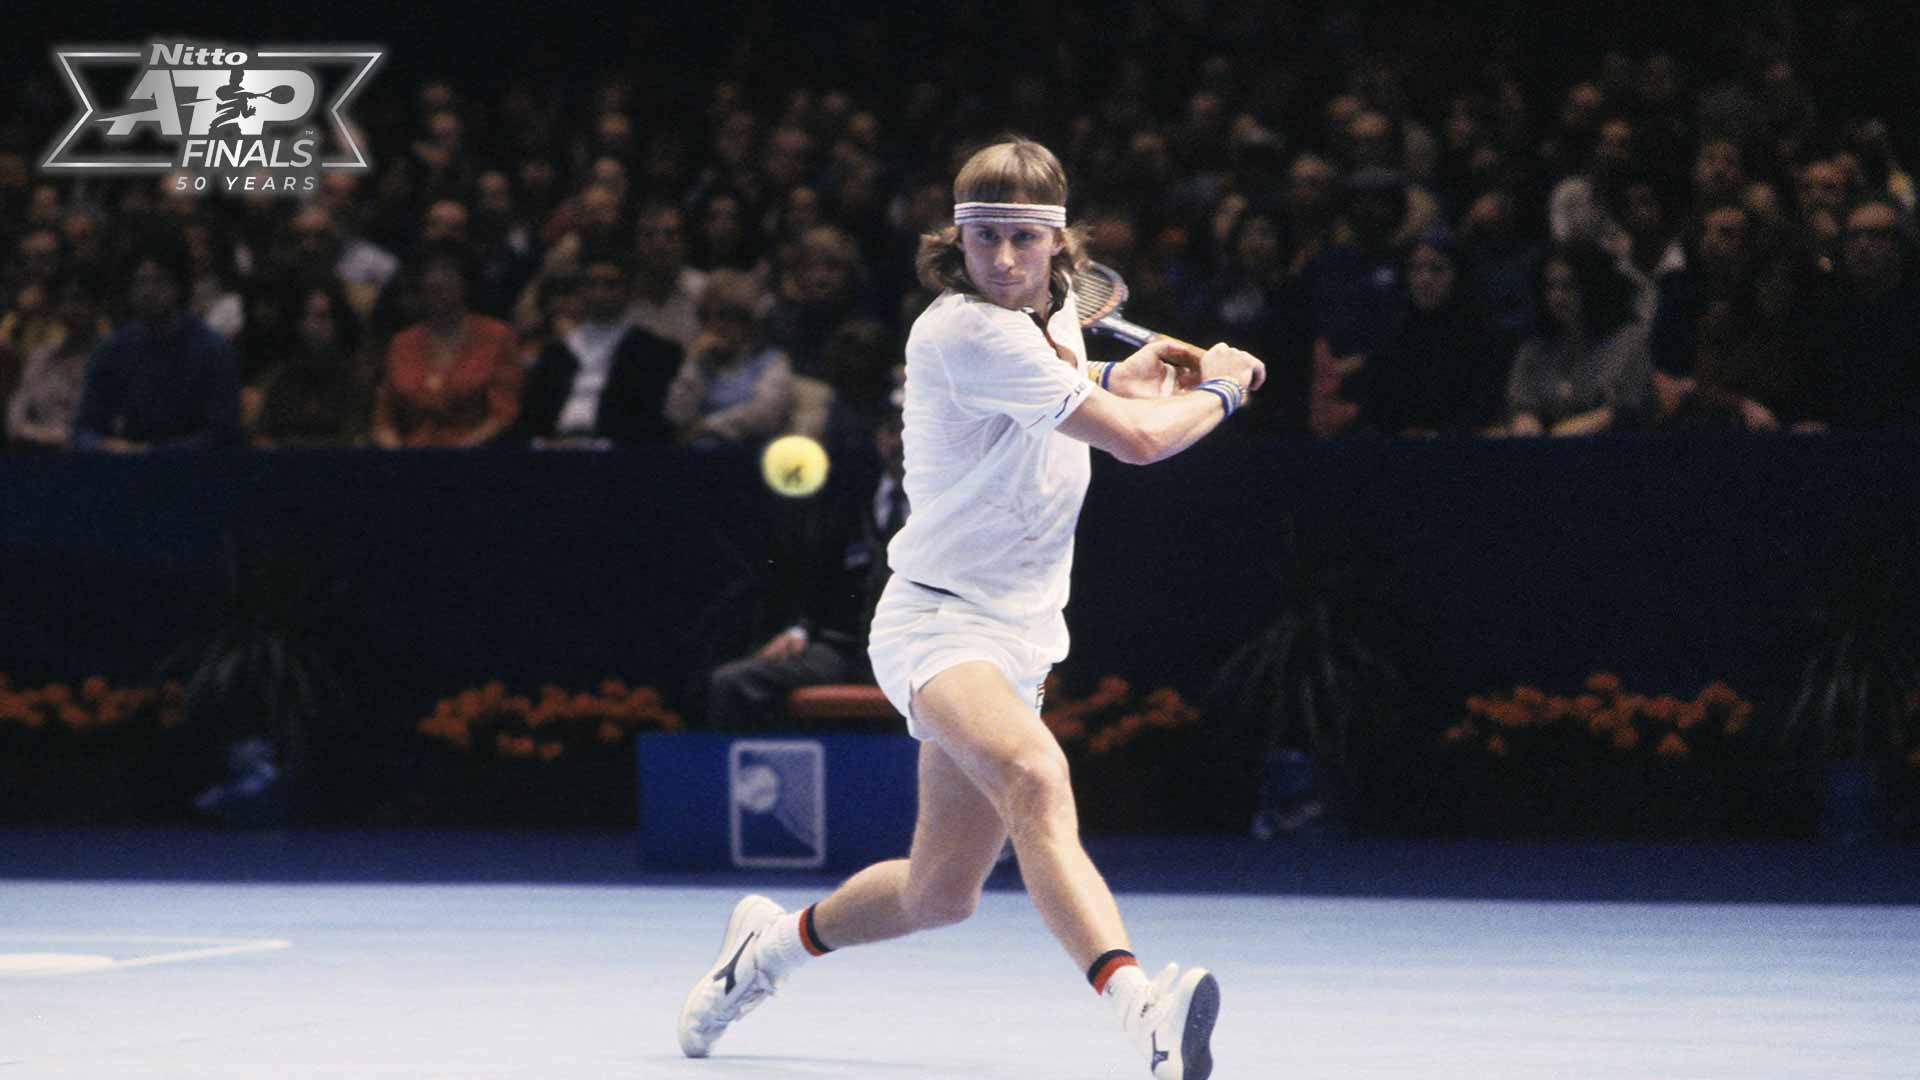 Bjorn Borg claimed back-to-back Masters titles at Madison Square Garden in 1979-80.